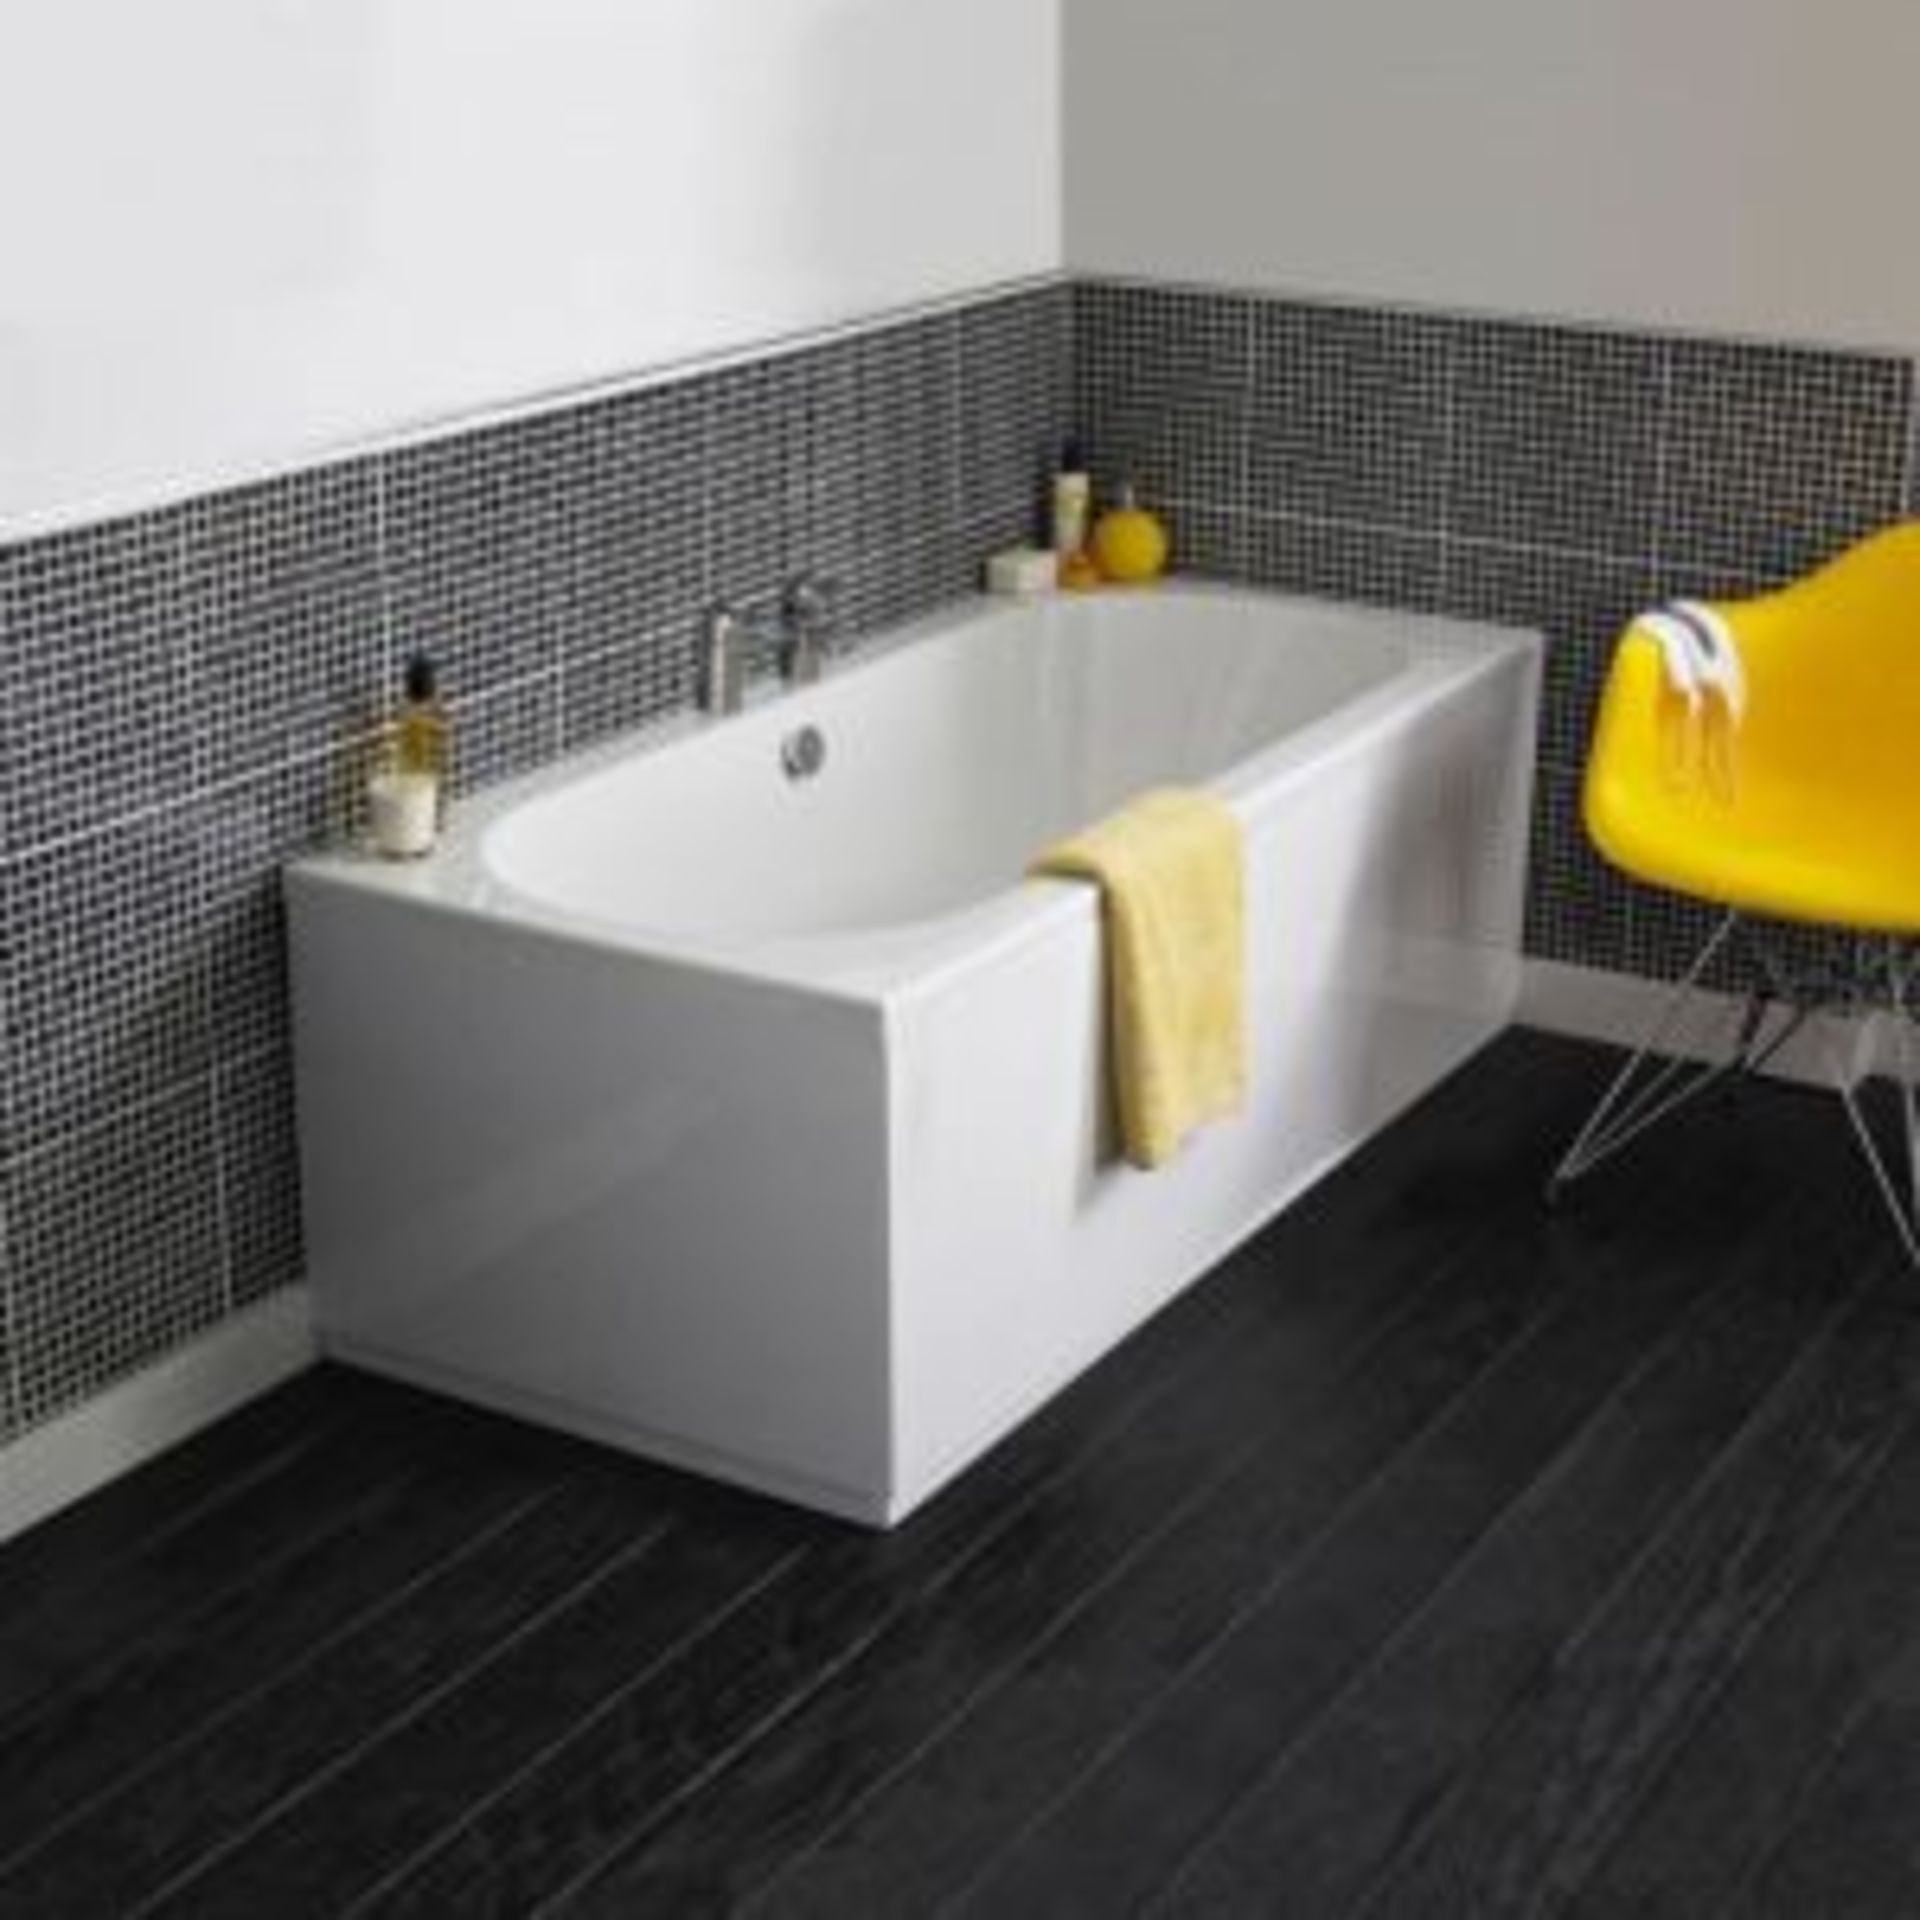 New (Y52) Cascade Supercast Double Ended 1700x700mm Bath. RRP £227.03. Cascade Supercast Doubl...